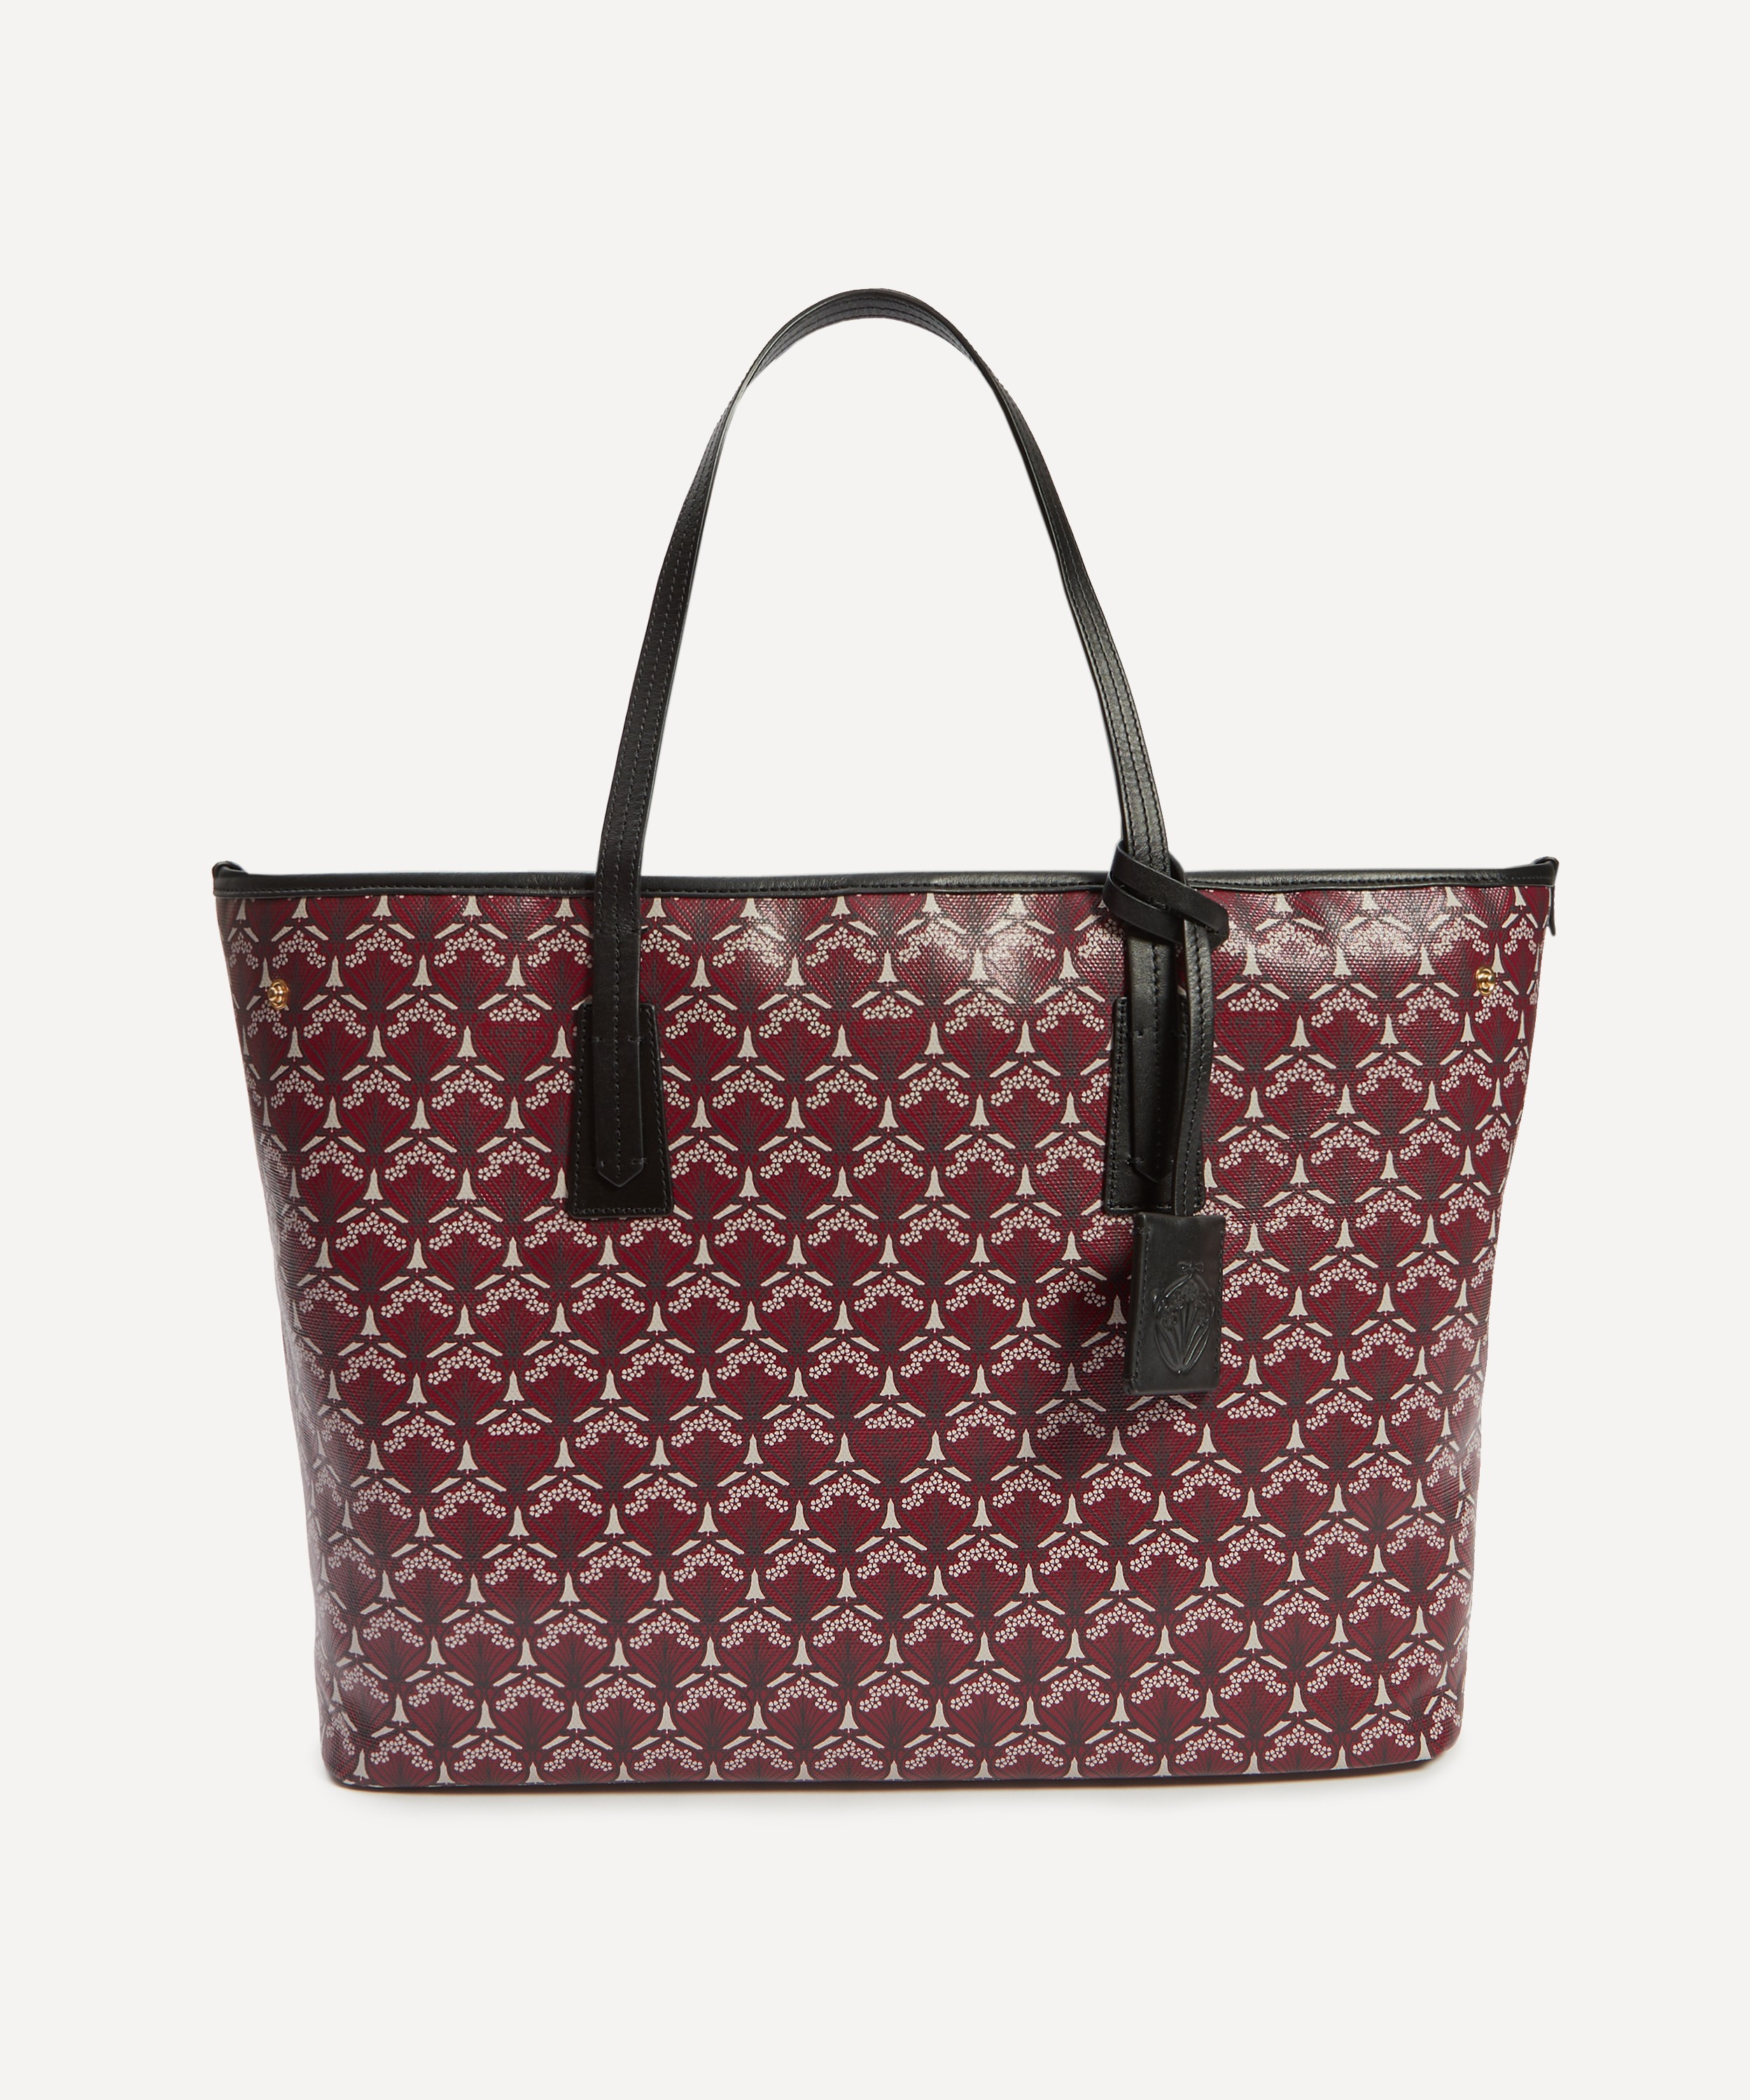 Liberty Women's Little Ditsy Alison Lewis Tote Bag